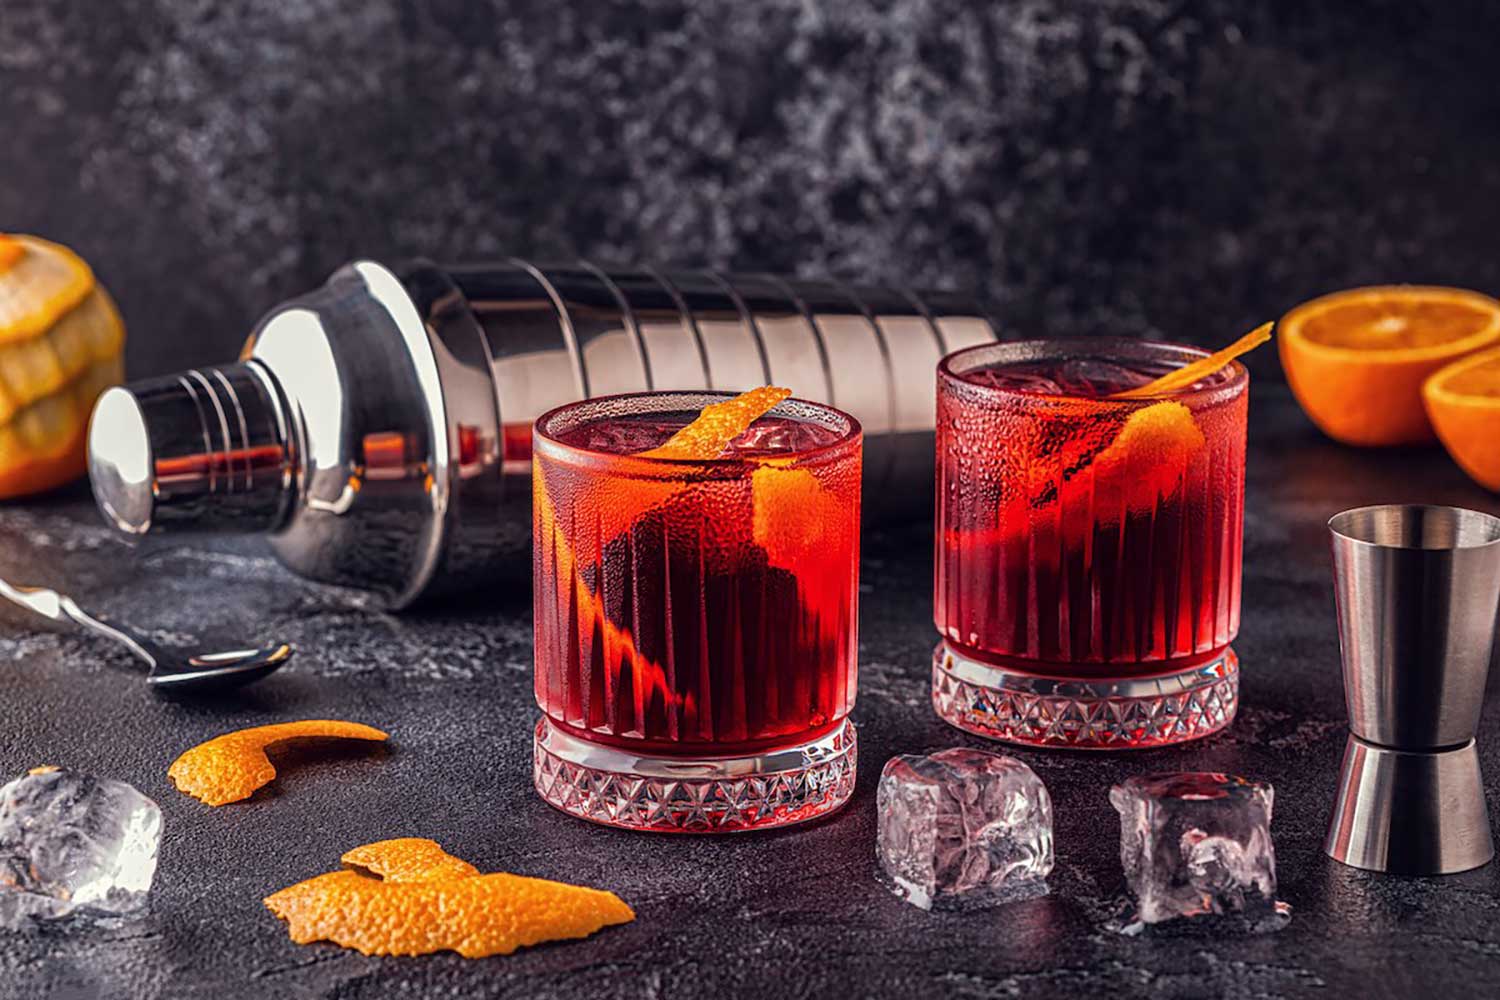 Two Negronis that have been shaken instead of stirred.